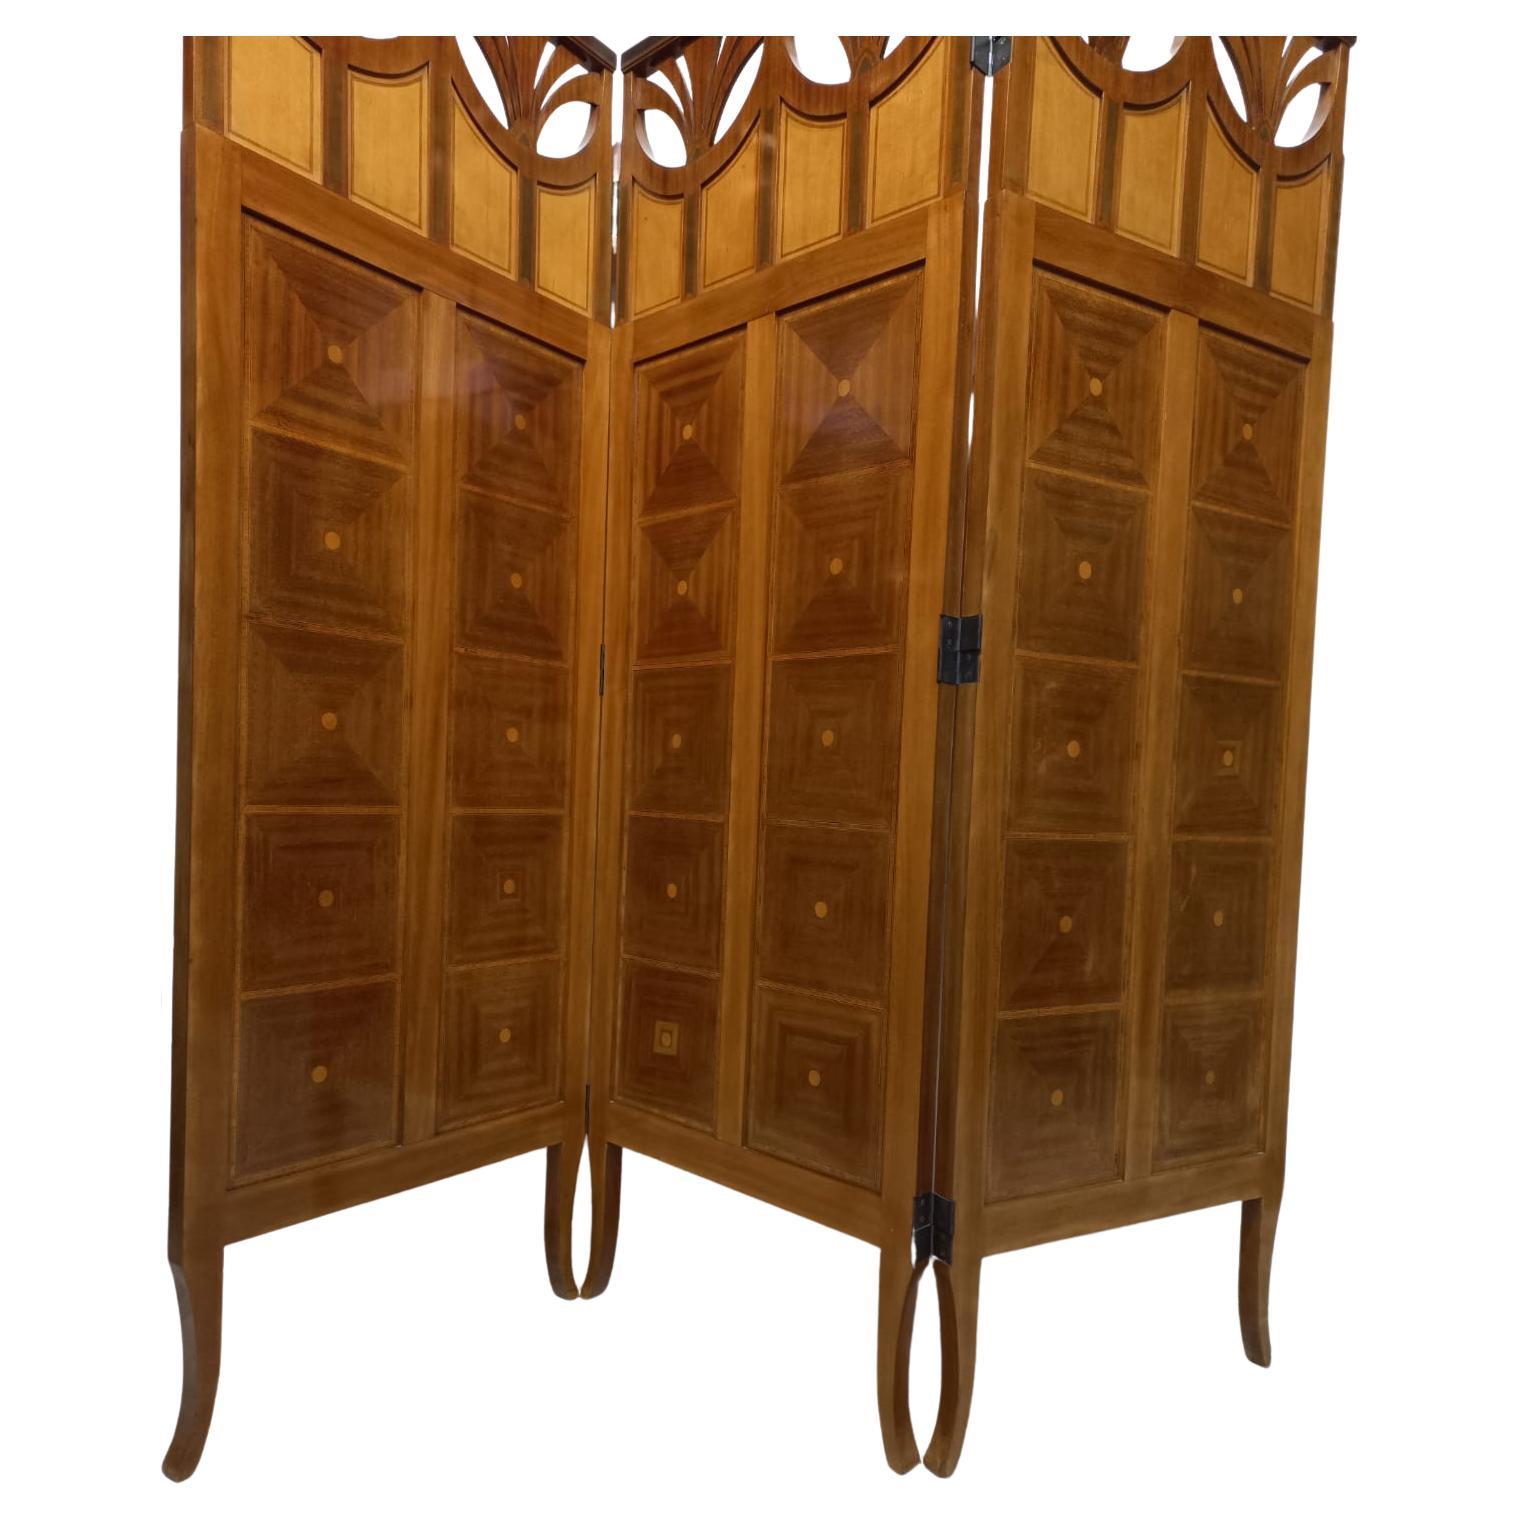 Art Deco screen made of solid wood For Sale 2